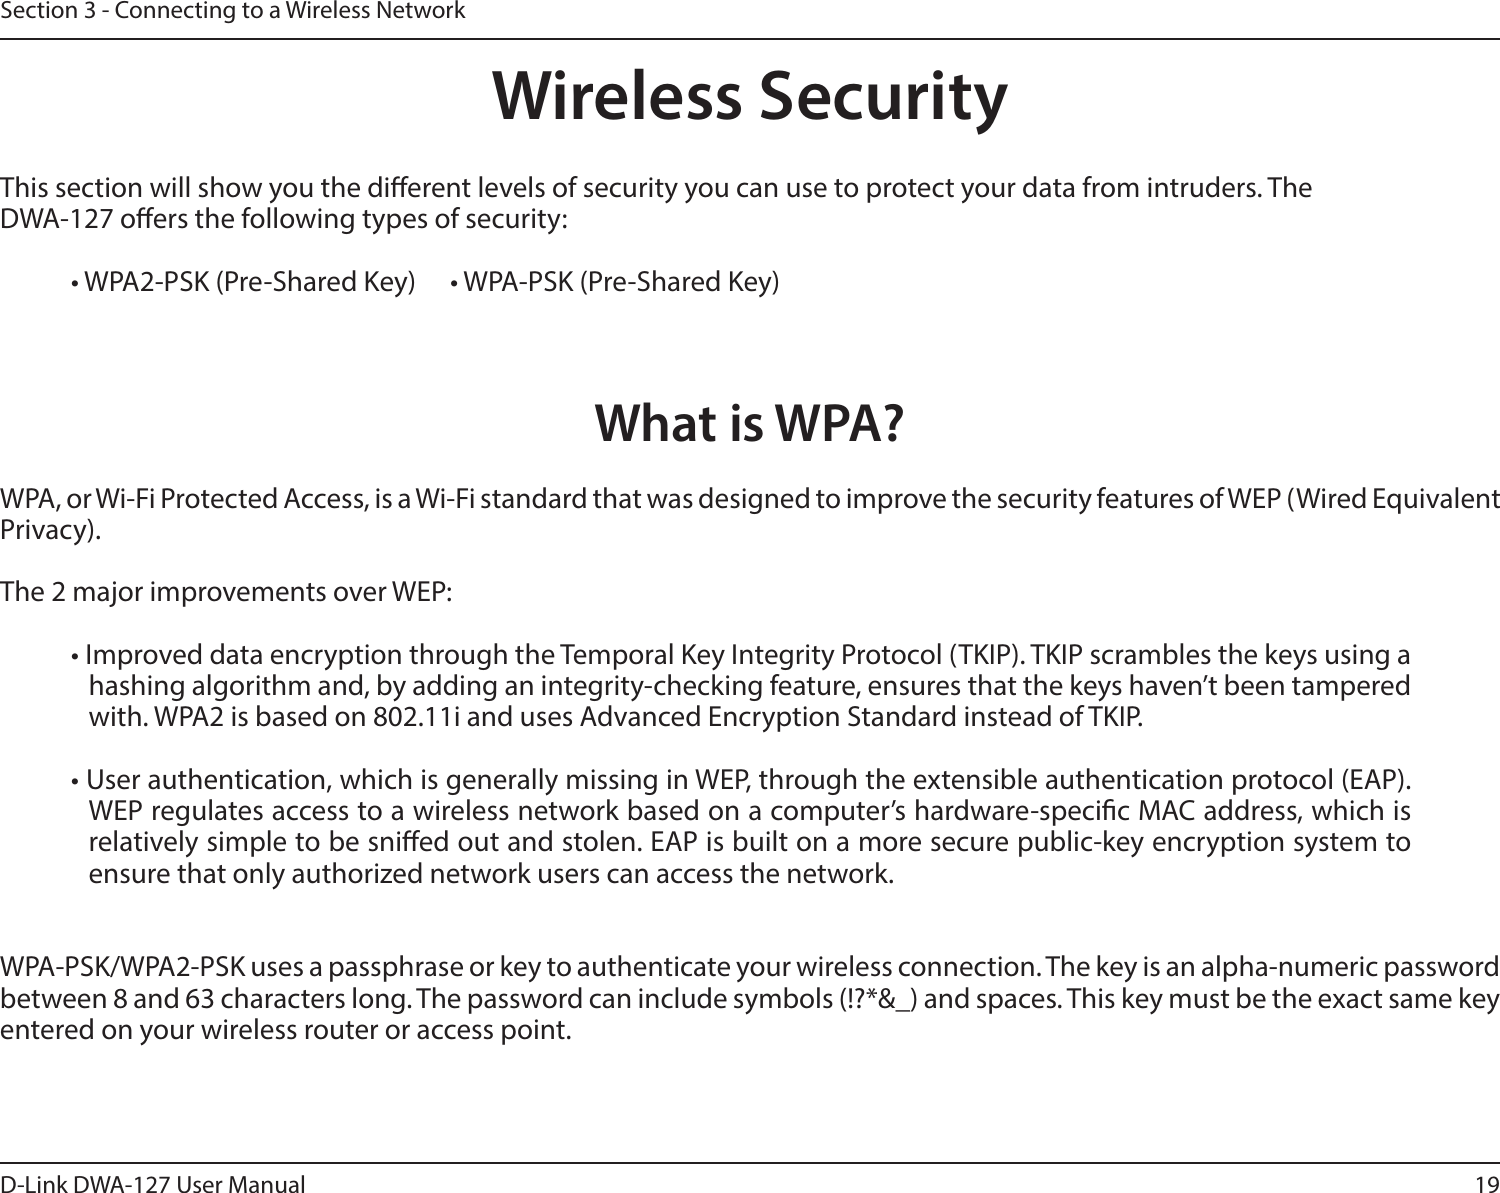 19D-Link DWA-127 User ManualSection 3 - Connecting to a Wireless NetworkWireless SecurityThis section will show you the dierent levels of security you can use to protect your data from intruders. The DWA-127 oers the following types of security:• WPA2-PSK (Pre-Shared Key)   • WPA-PSK (Pre-Shared Key)What is WPA?WPA, or Wi-Fi Protected Access, is a Wi-Fi standard that was designed to improve the security features of WEP (Wired Equivalent Privacy). The 2 major improvements over WEP: • Improved data encryption through the Temporal Key Integrity Protocol (TKIP). TKIP scrambles the keys using a hashing algorithm and, by adding an integrity-checking feature, ensures that the keys haven’t been tampered with. WPA2 is based on 802.11i and uses Advanced Encryption Standard instead of TKIP.• User authentication, which is generally missing in WEP, through the extensible authentication protocol (EAP). WEP regulates access to a wireless network based on a computer’s hardware-specic MAC address, which is relatively simple to be snied out and stolen. EAP is built on a more secure public-key encryption system to ensure that only authorized network users can access the network.WPA-PSK/WPA2-PSK uses a passphrase or key to authenticate your wireless connection. The key is an alpha-numeric password between 8 and 63 characters long. The password can include symbols (!?*&amp;_) and spaces. This key must be the exact same key entered on your wireless router or access point.